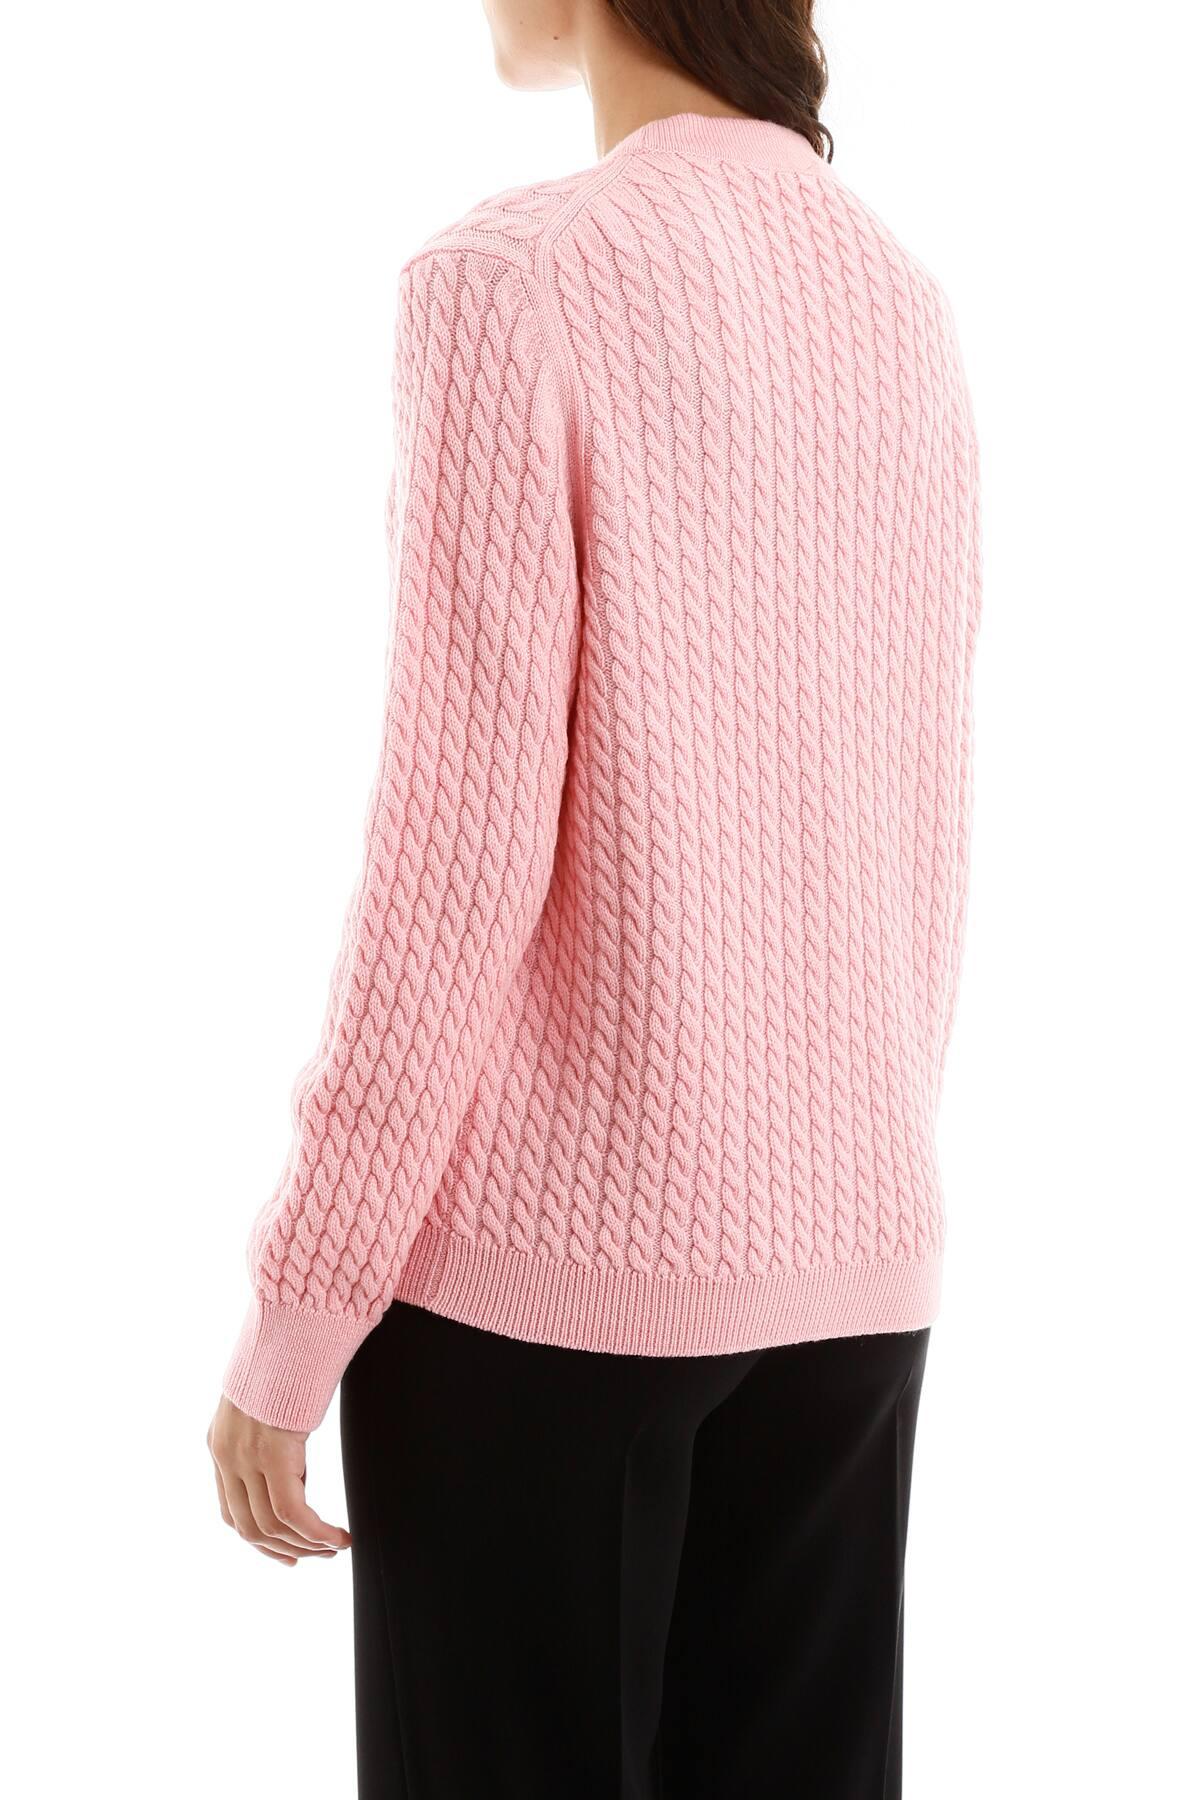 Alessandra Rich Cable-knit Cardigan in Pink - Lyst